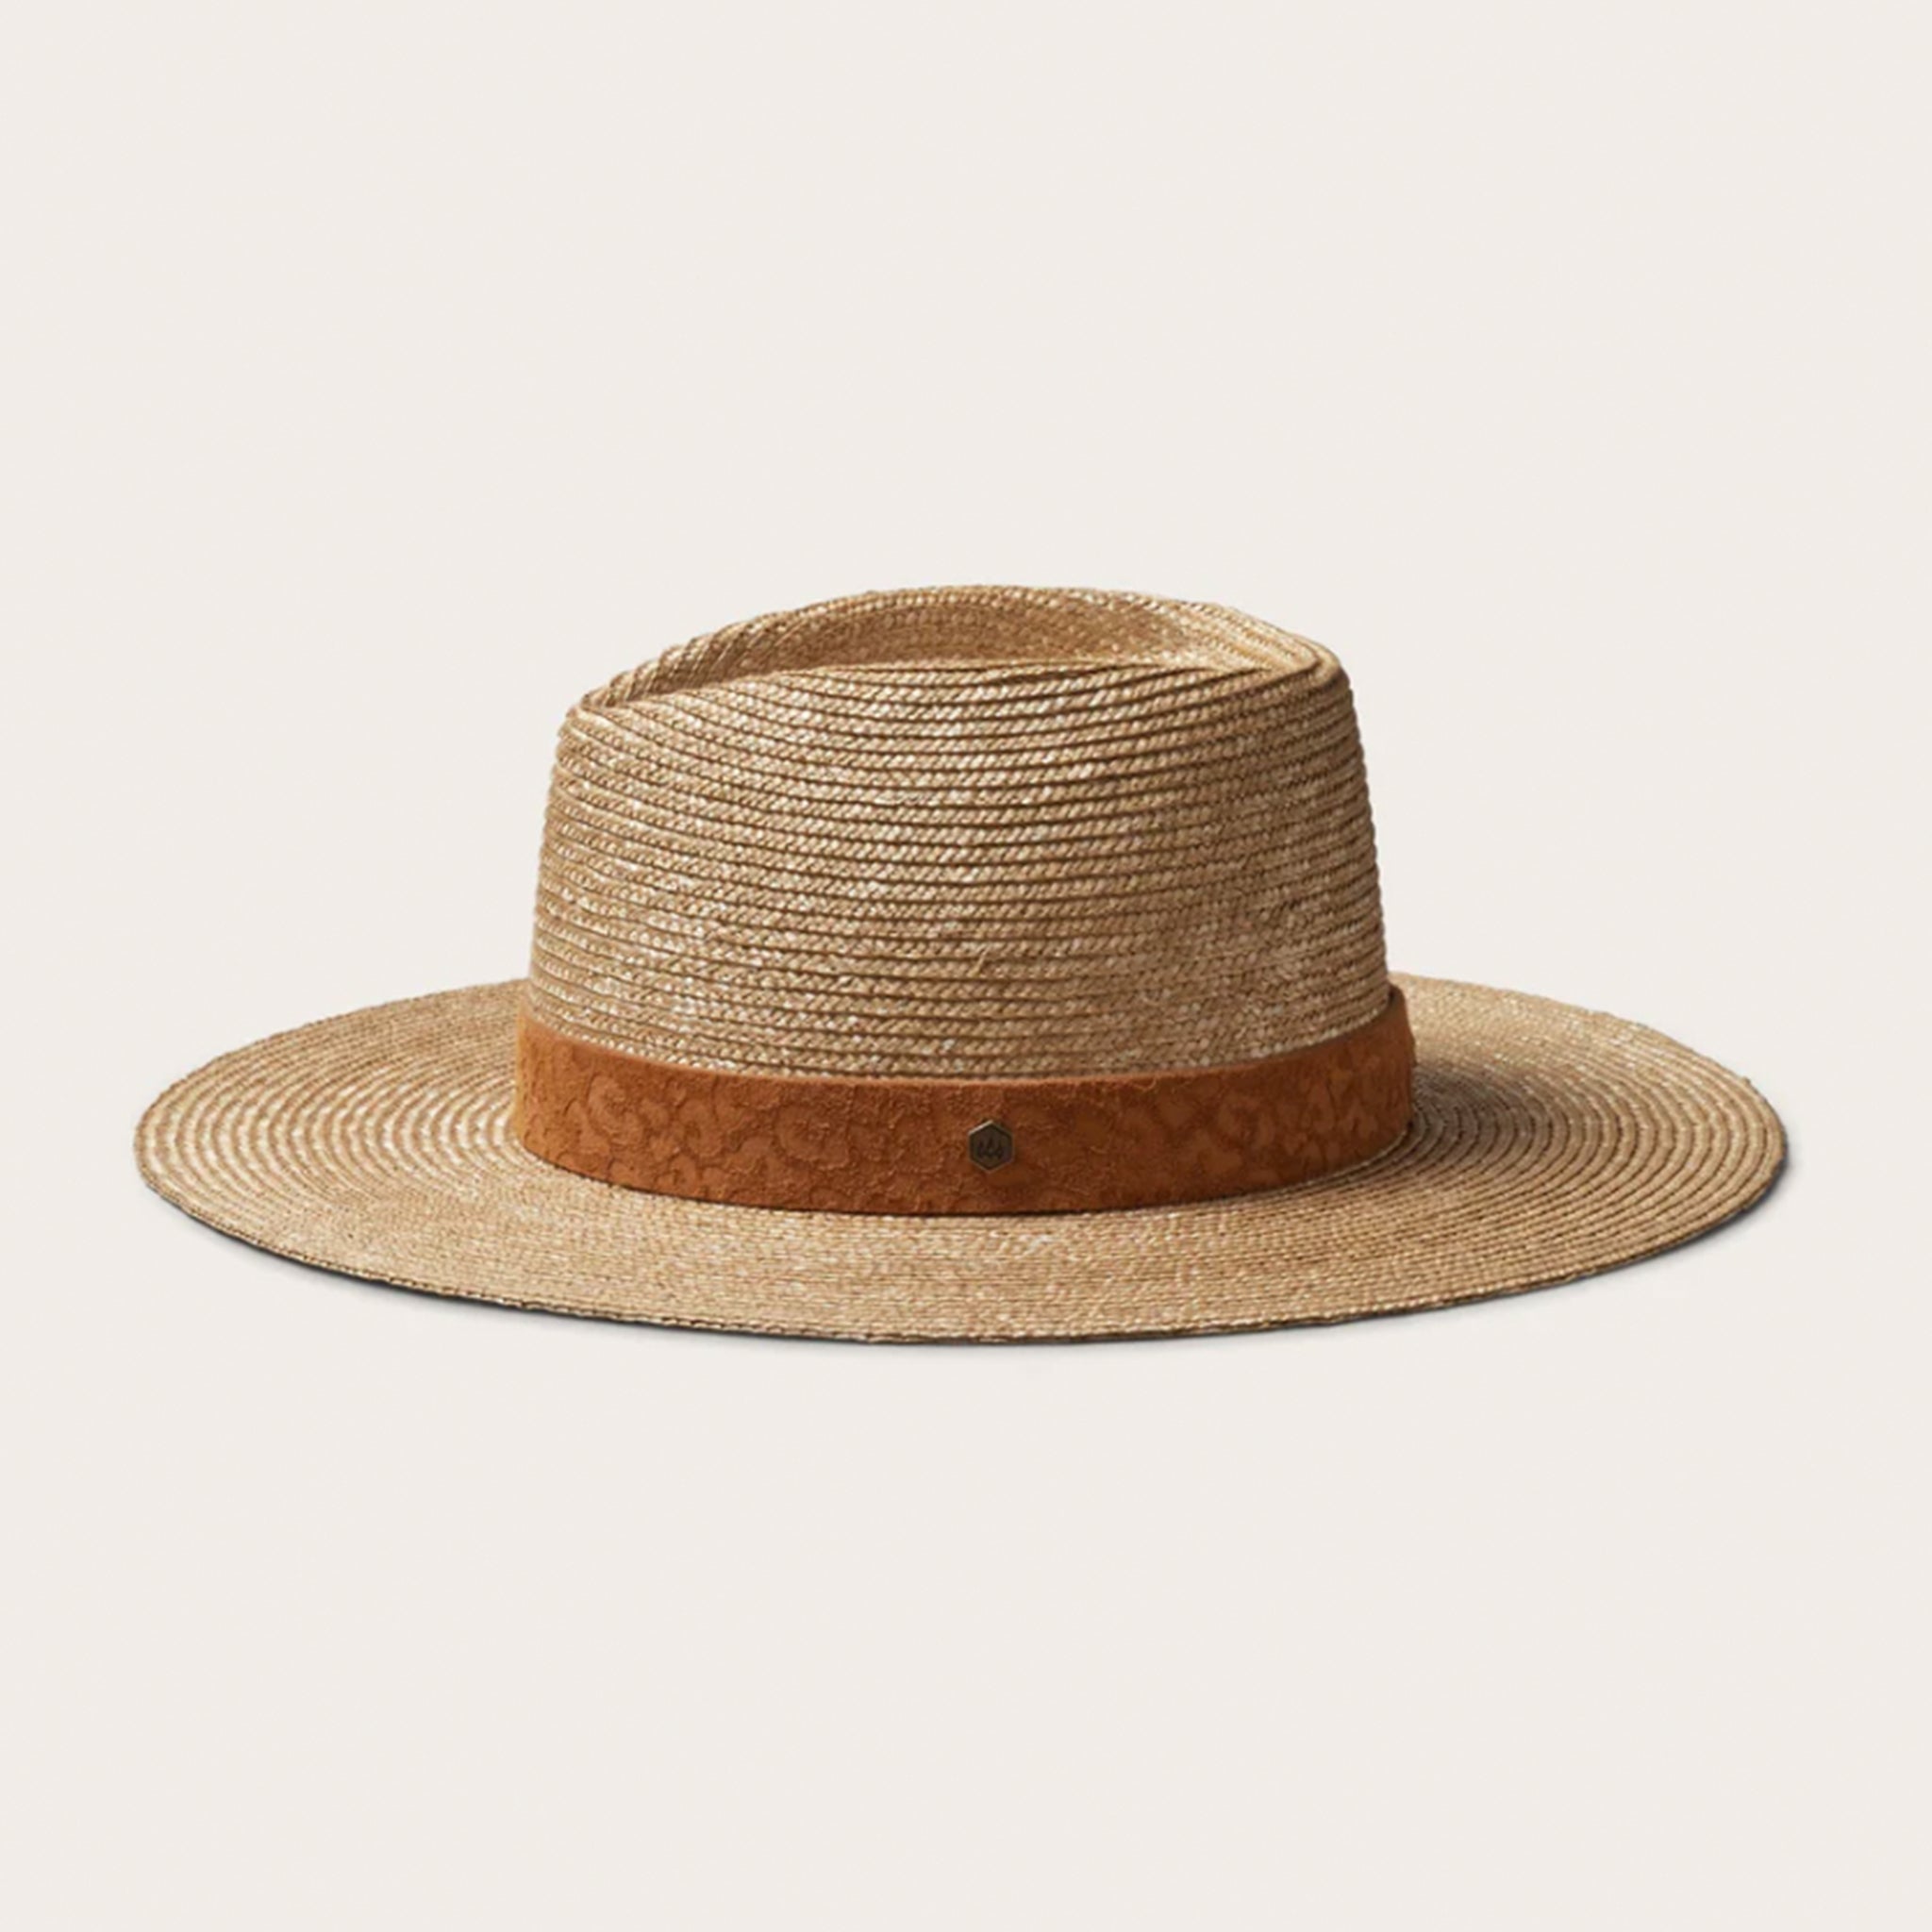 On a white background is a tan woven sun hat with a band around the base of the hat. 